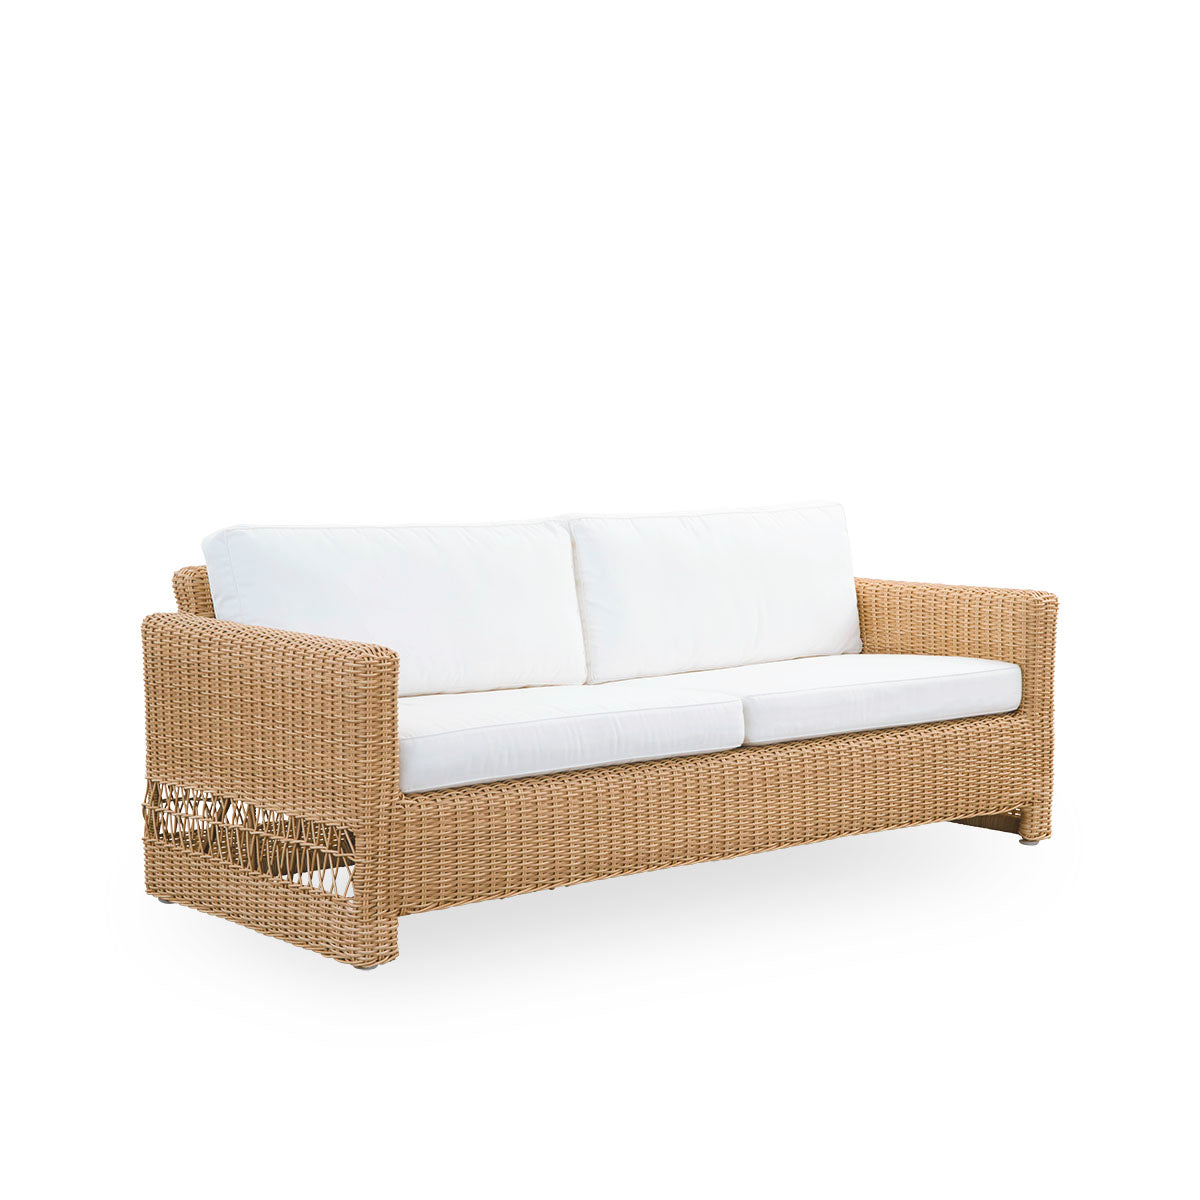 Carrie 3-Seater Garden Sofa by Sika